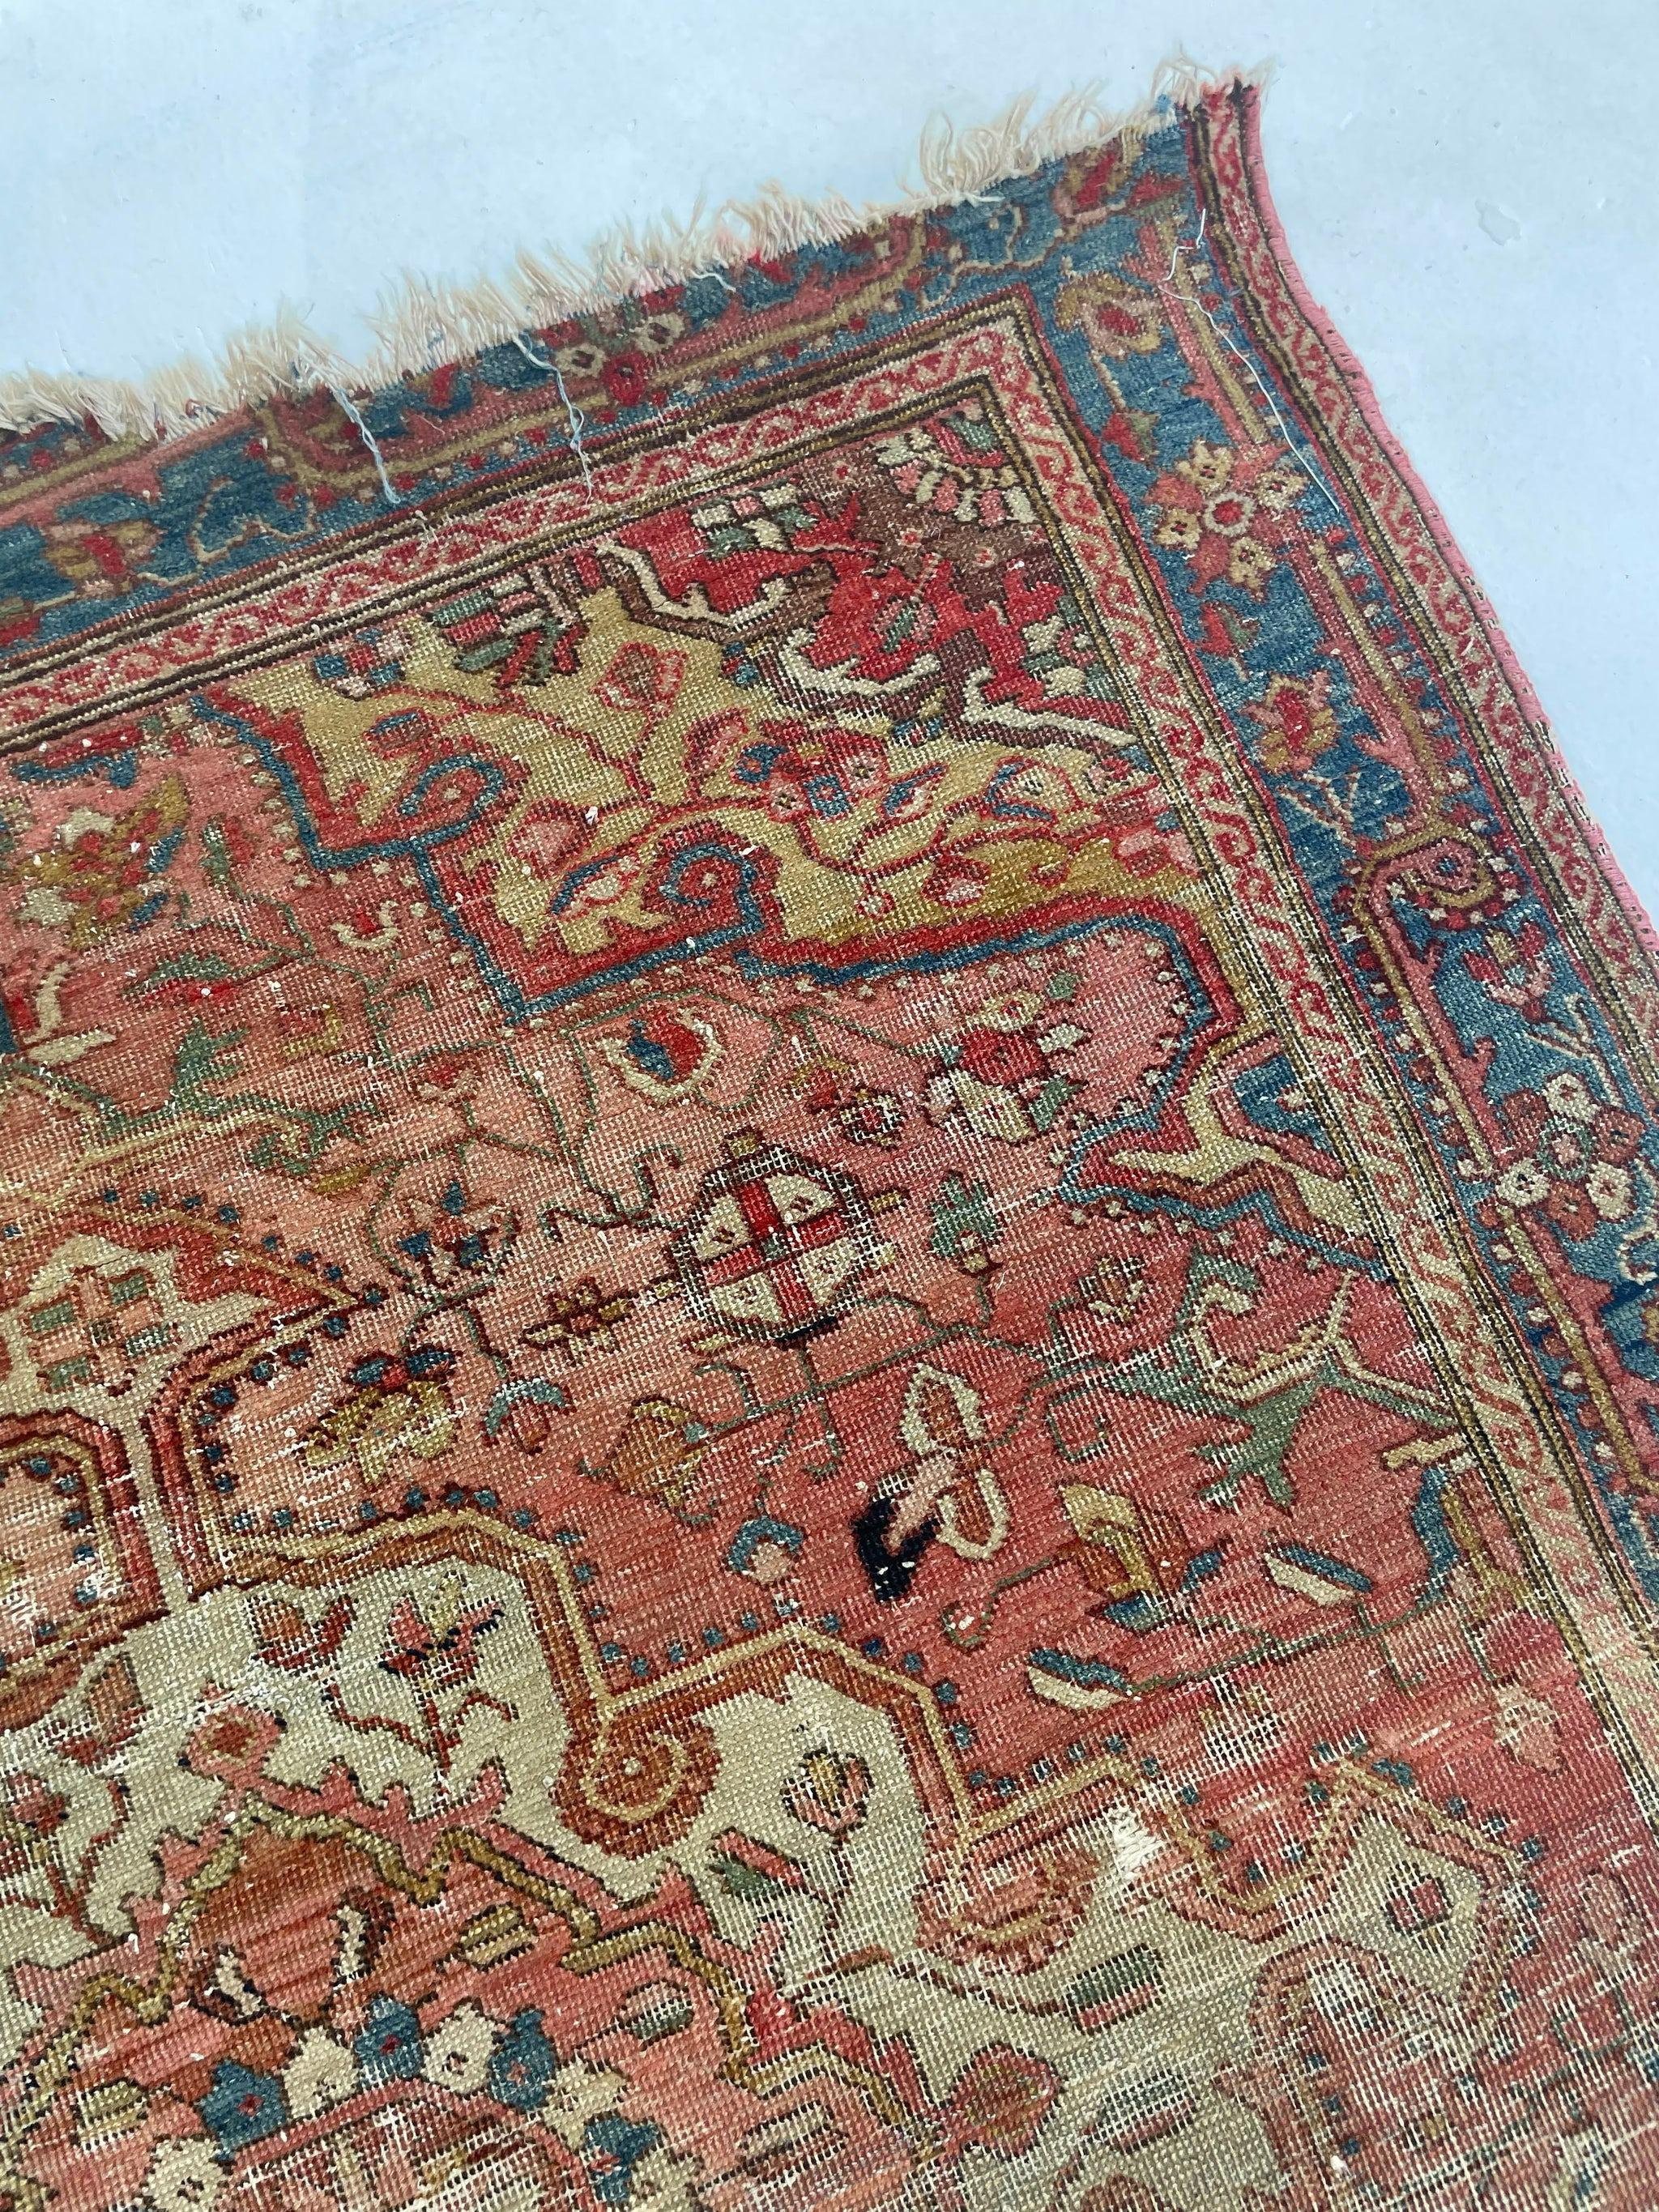 Antique Rug Squarish Size with Camel Corners, c.1910 For Sale 3